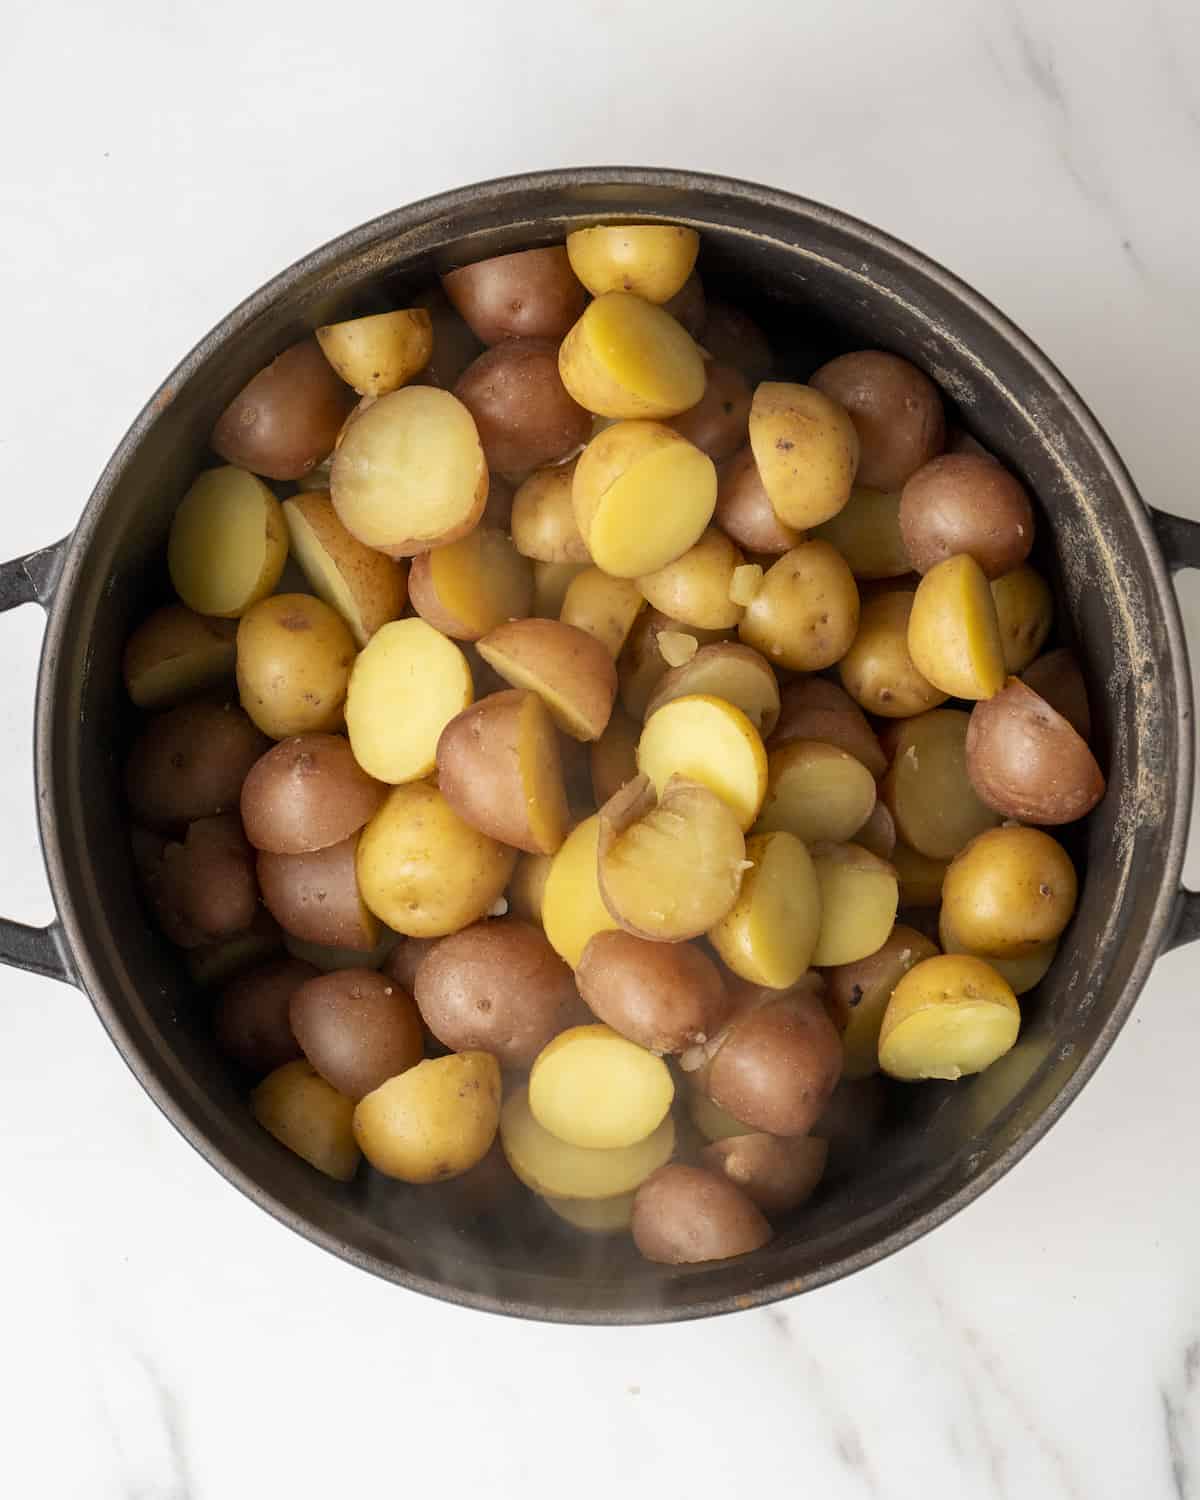 Boiled baby potatoes in a pot.